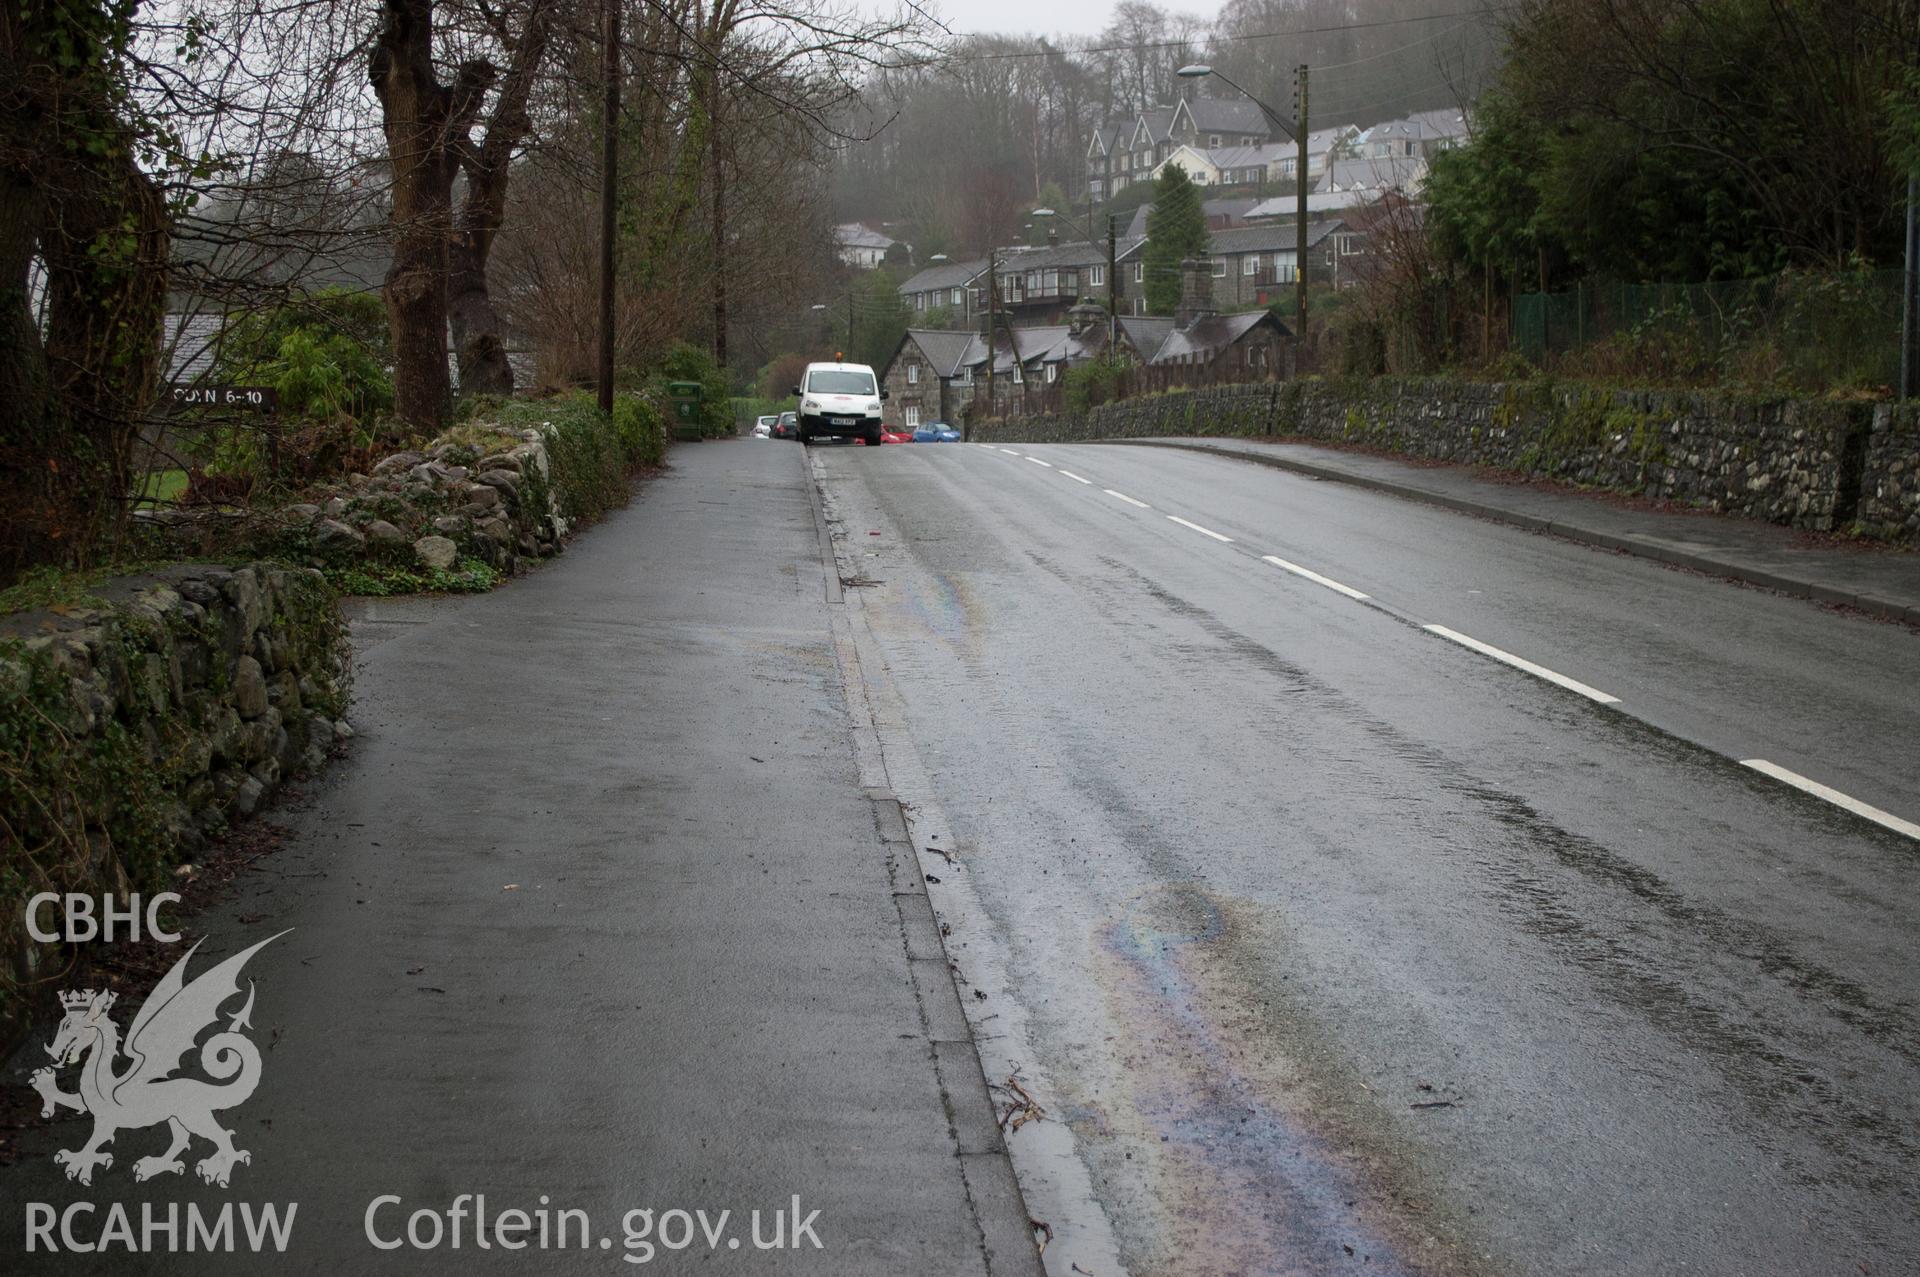 Marian Mawr archaeological assessment; section C-D, view from W showing view along street showing pipe route in pavement, taken by Robert Evans of Gwynedd Archaeological Trust, 5th February 2016.